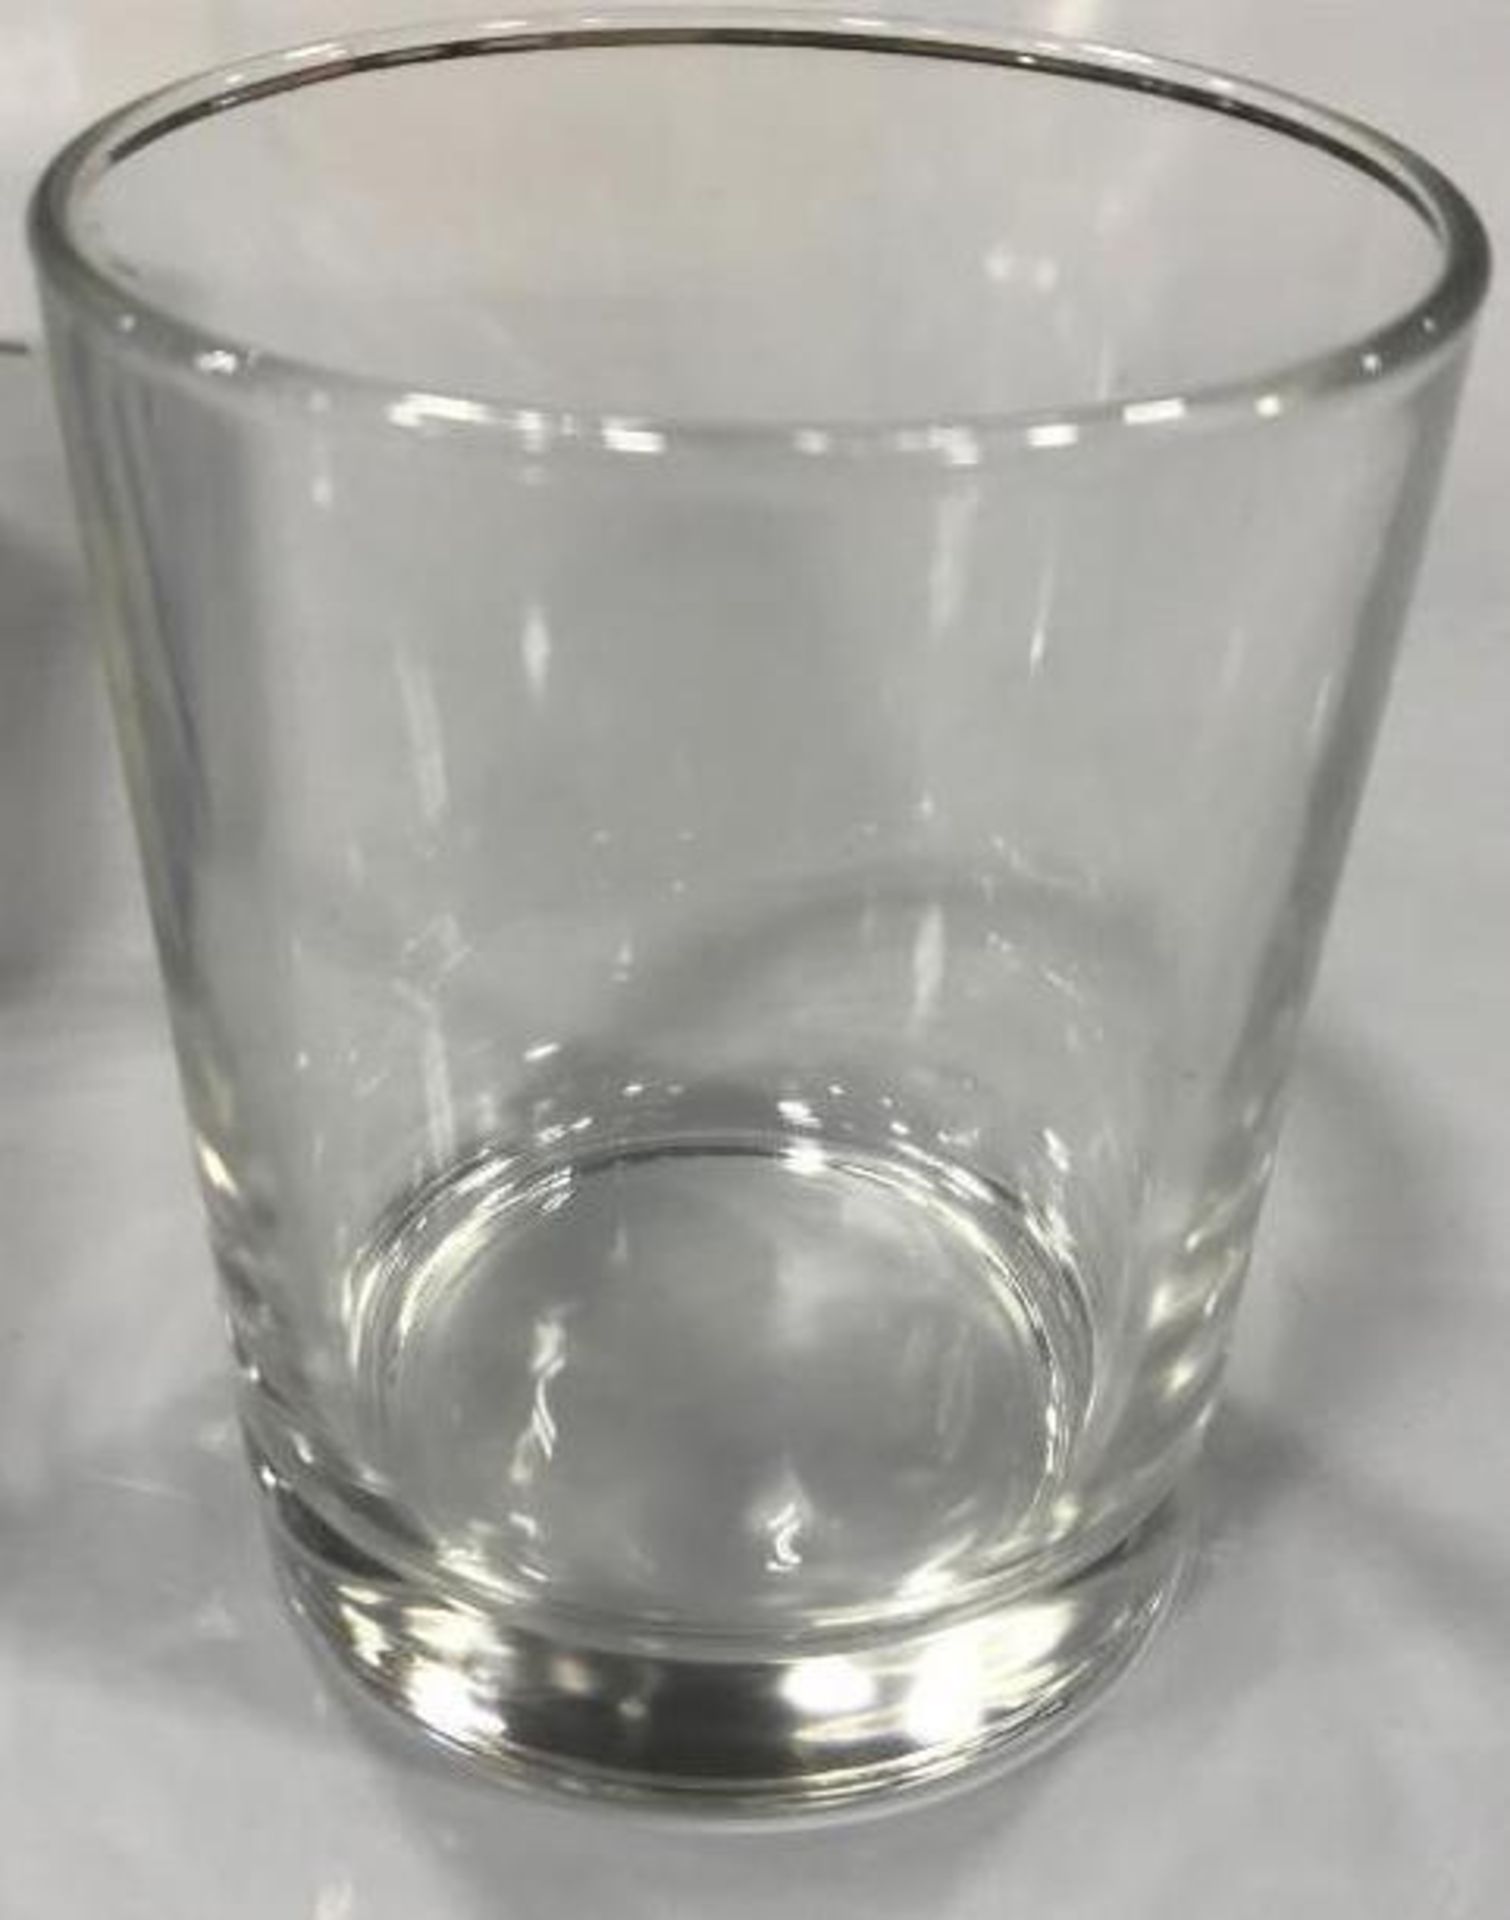 9.5OZ/270ML STOCKHOLM OLD FASHIONED GLASSES - BOX OF 6, ARCOROC 00826 - NEW - Image 2 of 2